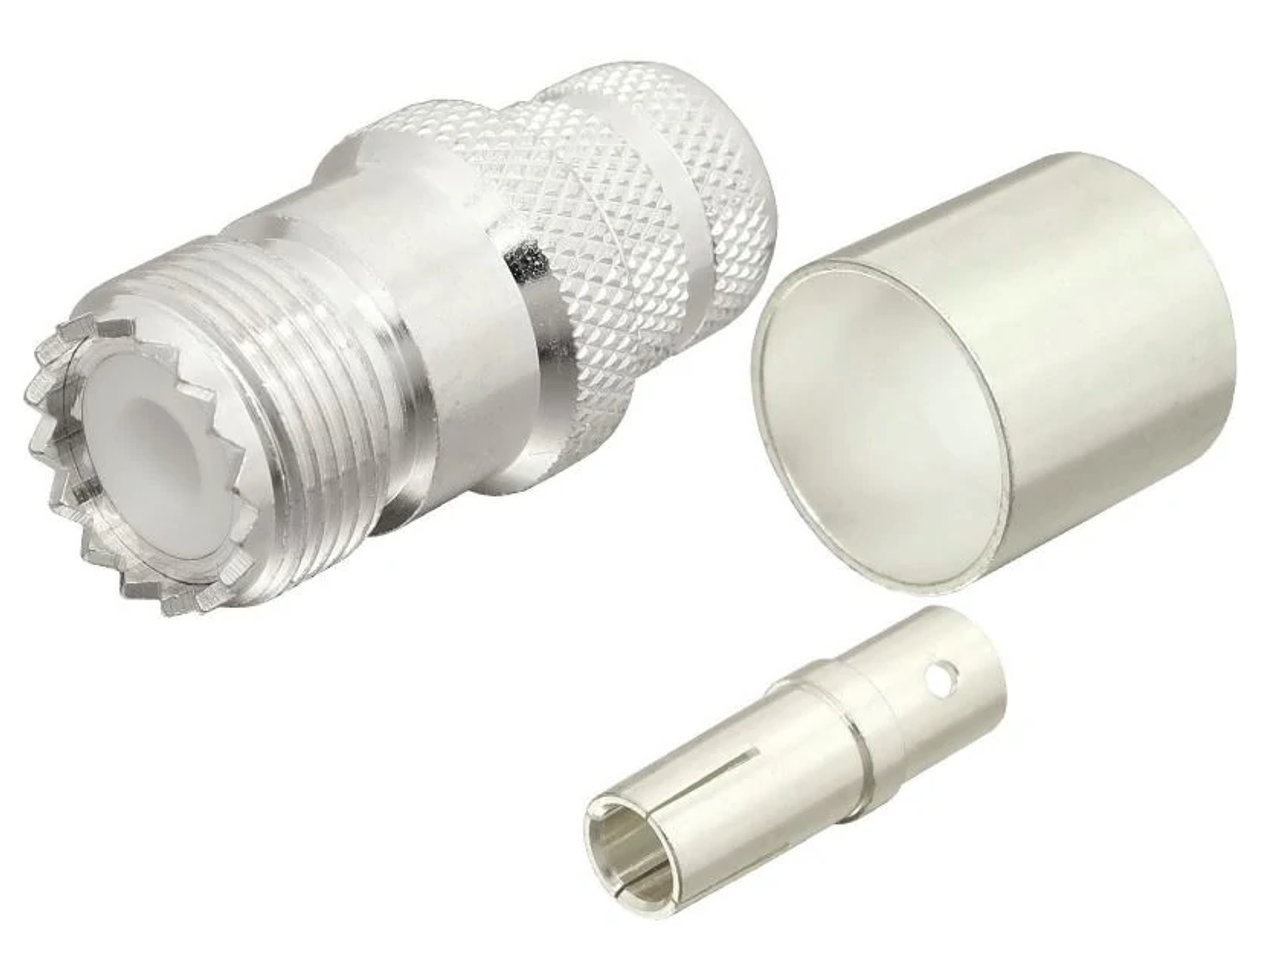 UHF-Female SO239 Cable End Connector LMR600 Coaxial Cable